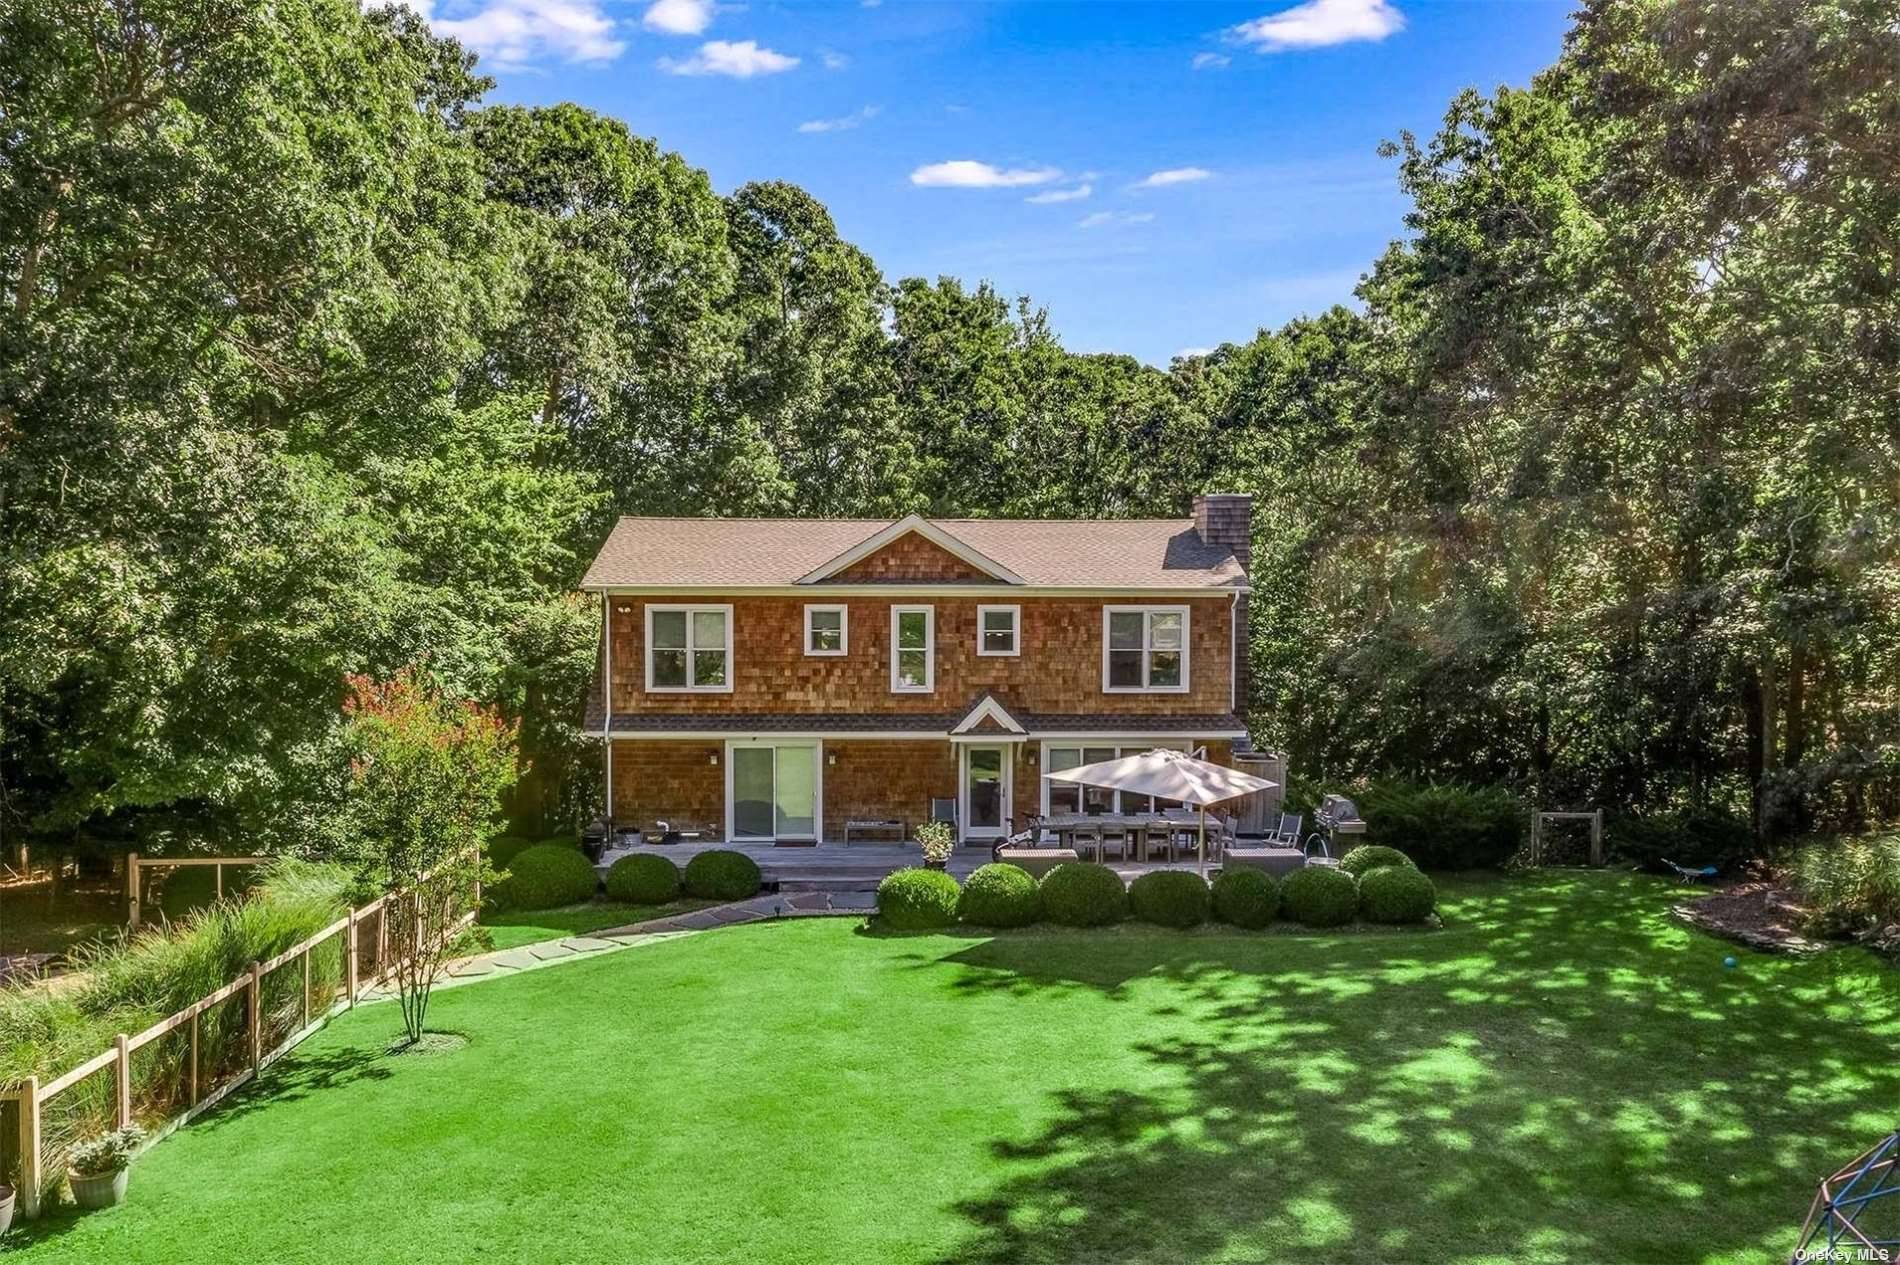 RP220711. This traditional home on 7 acres offers privacy and convenience with its proximity to Sag Harbor Village amenities.